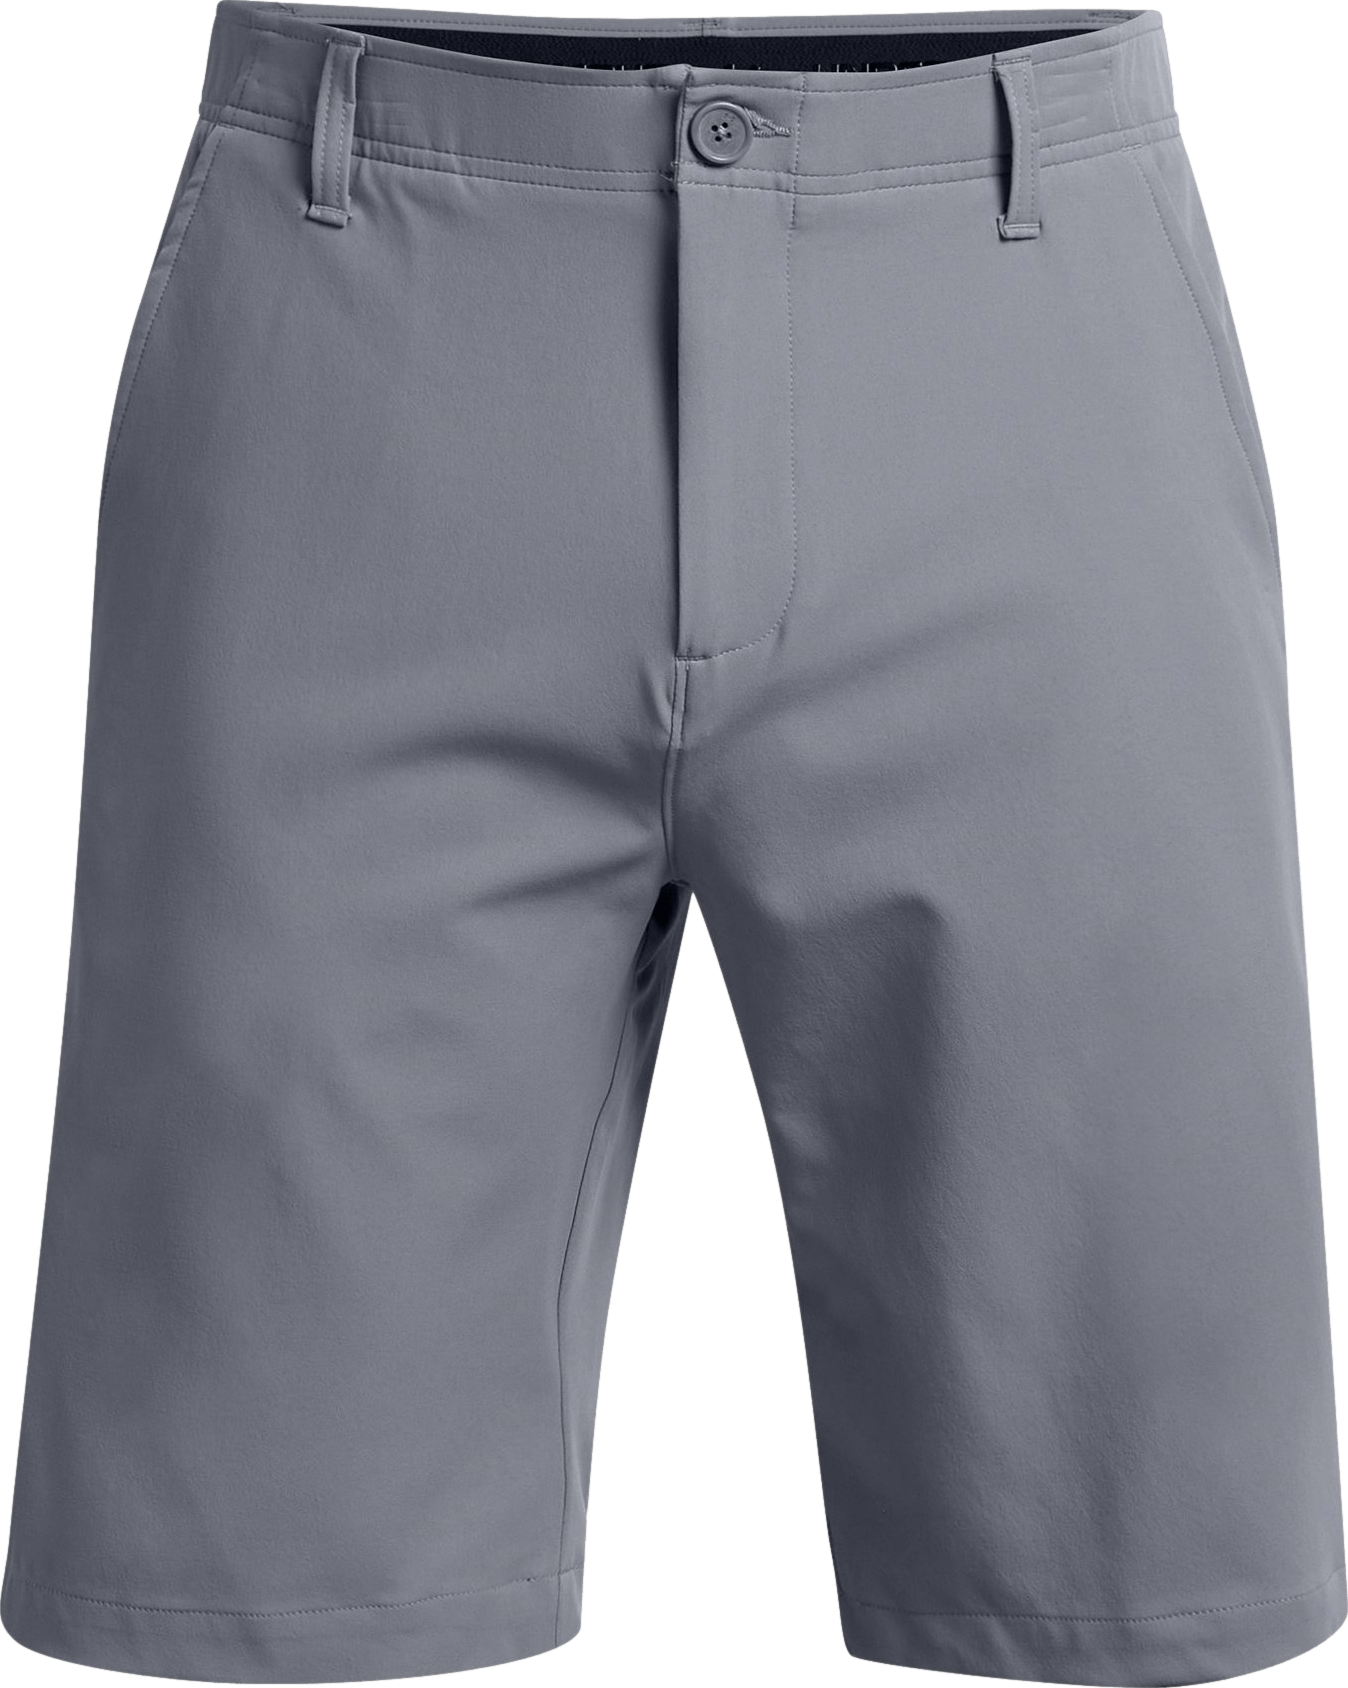 Under Armour Men's Drive Taper Shorts